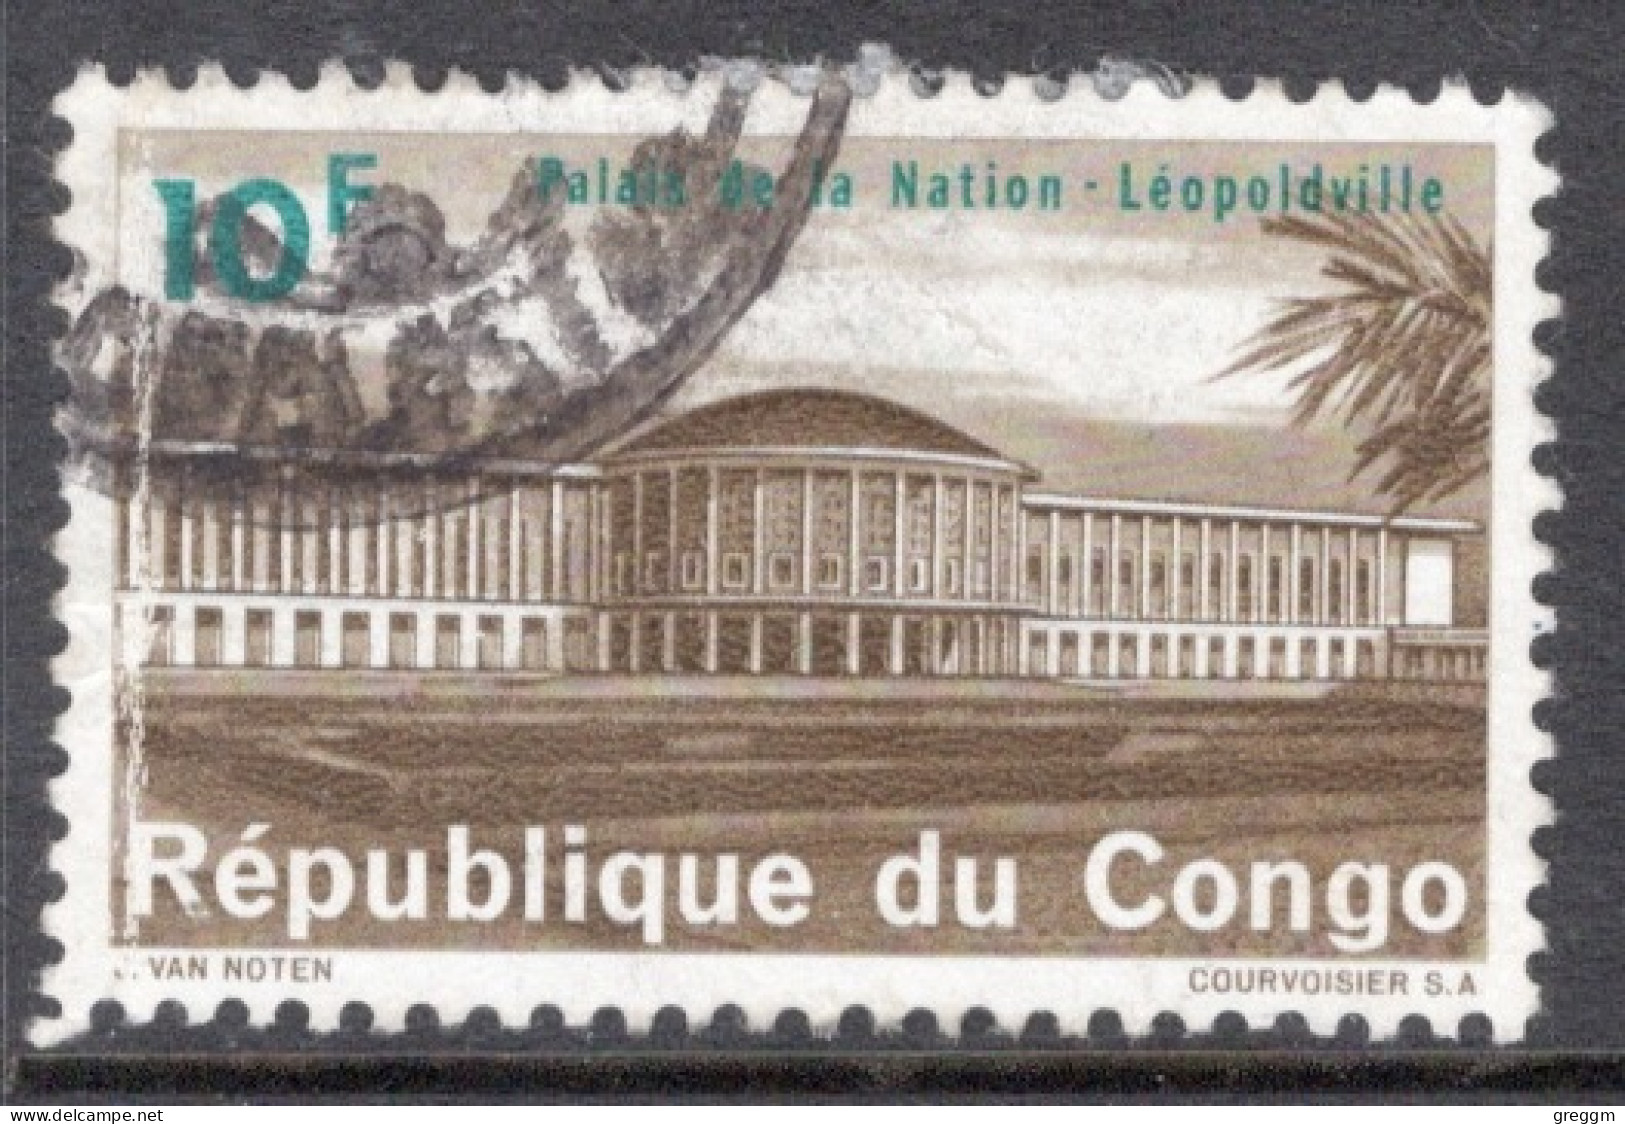 Kinshasa Congo 1964 Single 10f Stamp From The Definitive Set  National Palace, Leopoldville  In Fine Used. - Usati